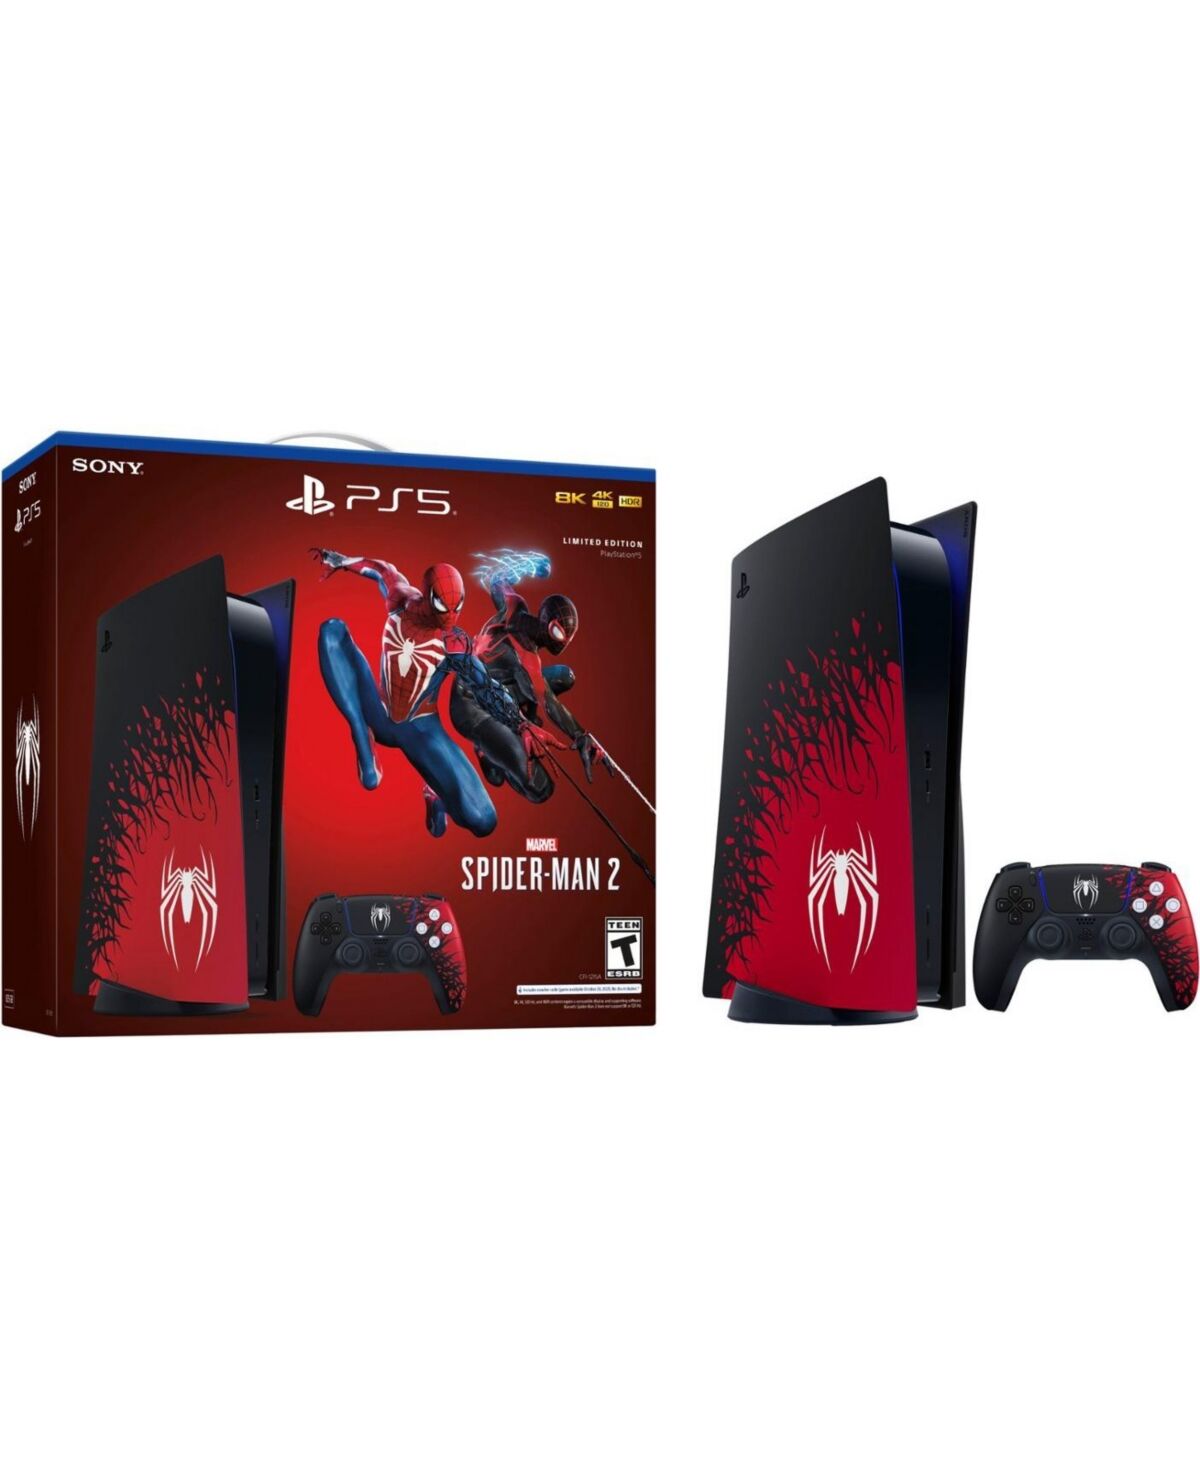 Sony PlayStation 5 Console - Marvels Spider-Man 2 Limited Edition Bundle - Red